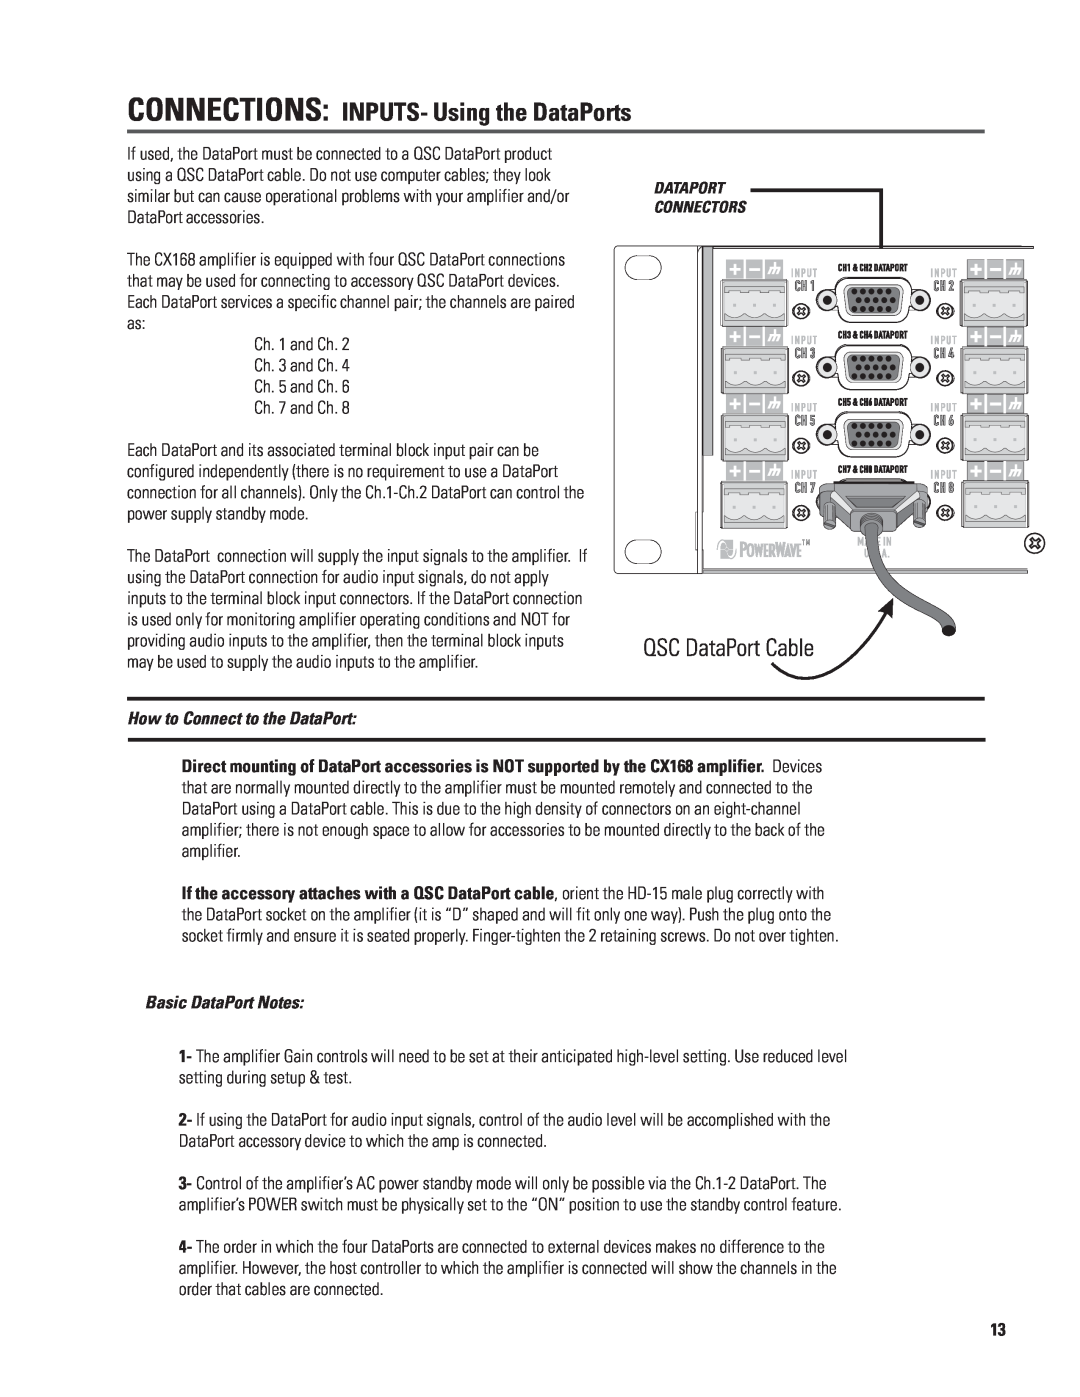 QSC Audio CX168 user manual CONNECTIONS INPUTS- Using the DataPorts, How to Connect to the DataPort, Basic DataPort Notes 